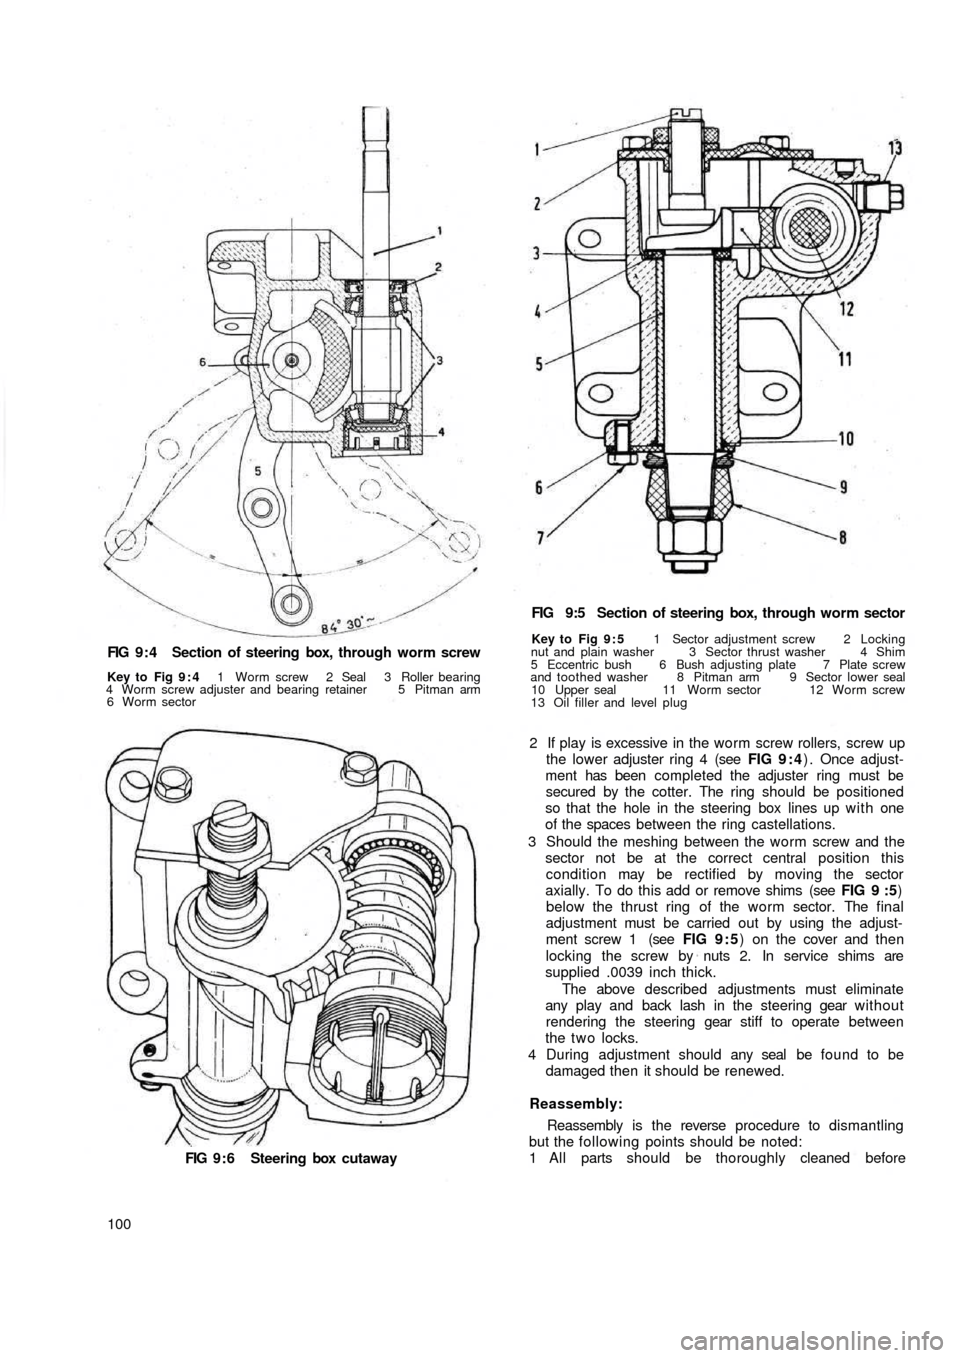 FIAT 500 1968 1.G Workshop Manual FIG 9 : 4  Section of steering box,  through worm screw
Key to  Fig 9 : 4 1 Worm screw 2 Seal 3 Roller bearing
4 Worm screw adjuster and bearing retainer 5 Pitman arm
6 Worm sector
FIG 9 : 6  Steering